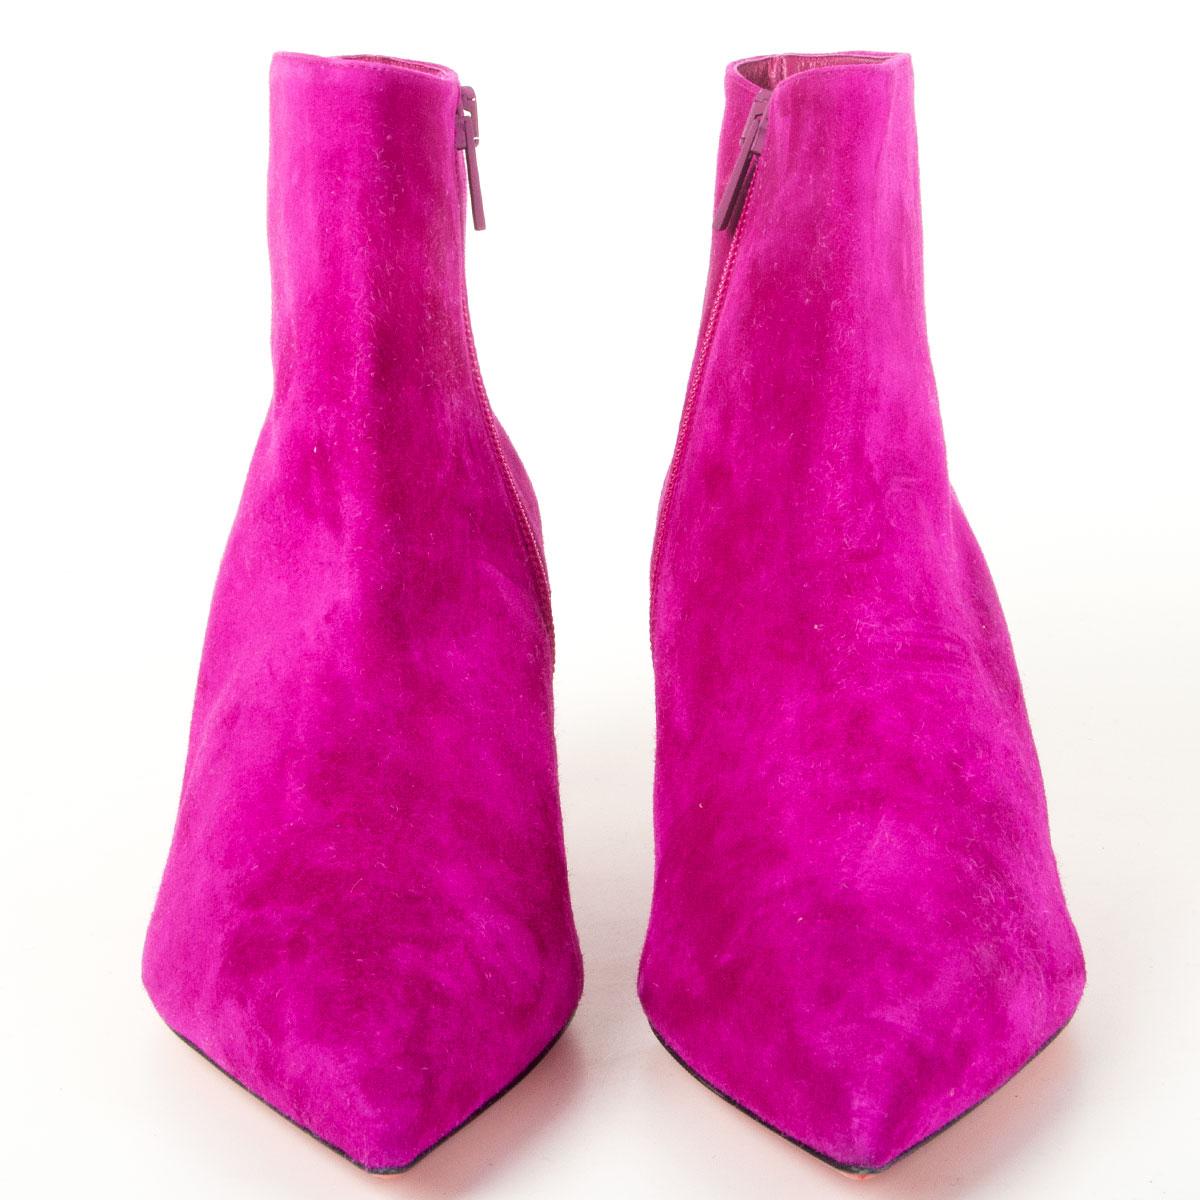 100% authentic Christian Louboutin So Kate 55 pointed-toe ankle booties in fuchsia suede. Open with a zipper on the inside. Brand new. 

Imprinted Size 38.5
Shoe Size 38.5
Inside Sole 25cm (9.8in)
Width 7.5cm (2.9in)
Heel 5.5cm (2.1in)